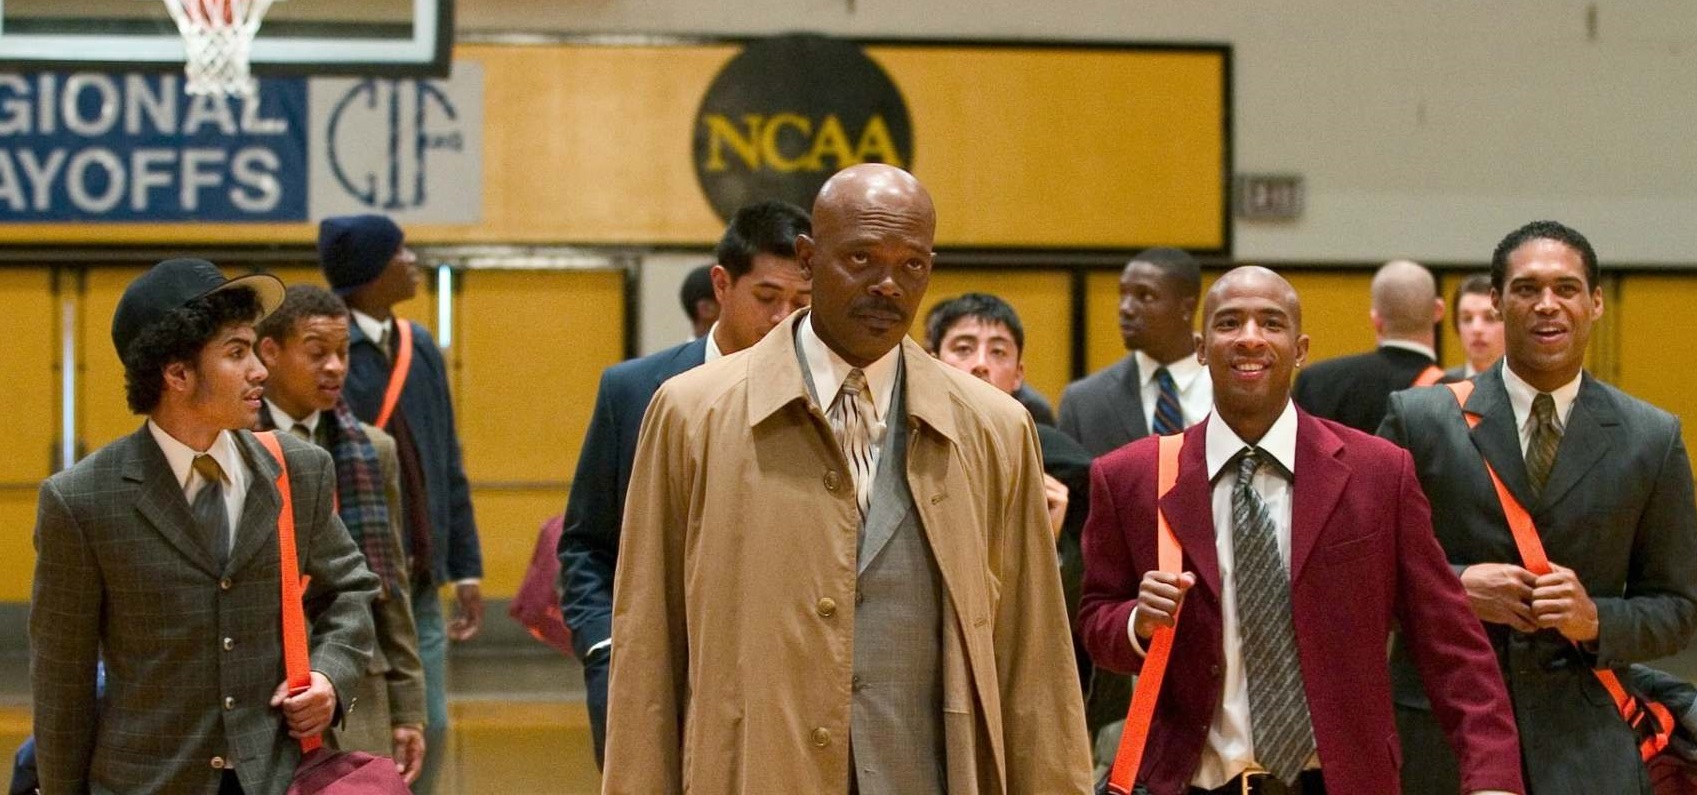 Coach Carter (2005) Cast Then And Now 2020 